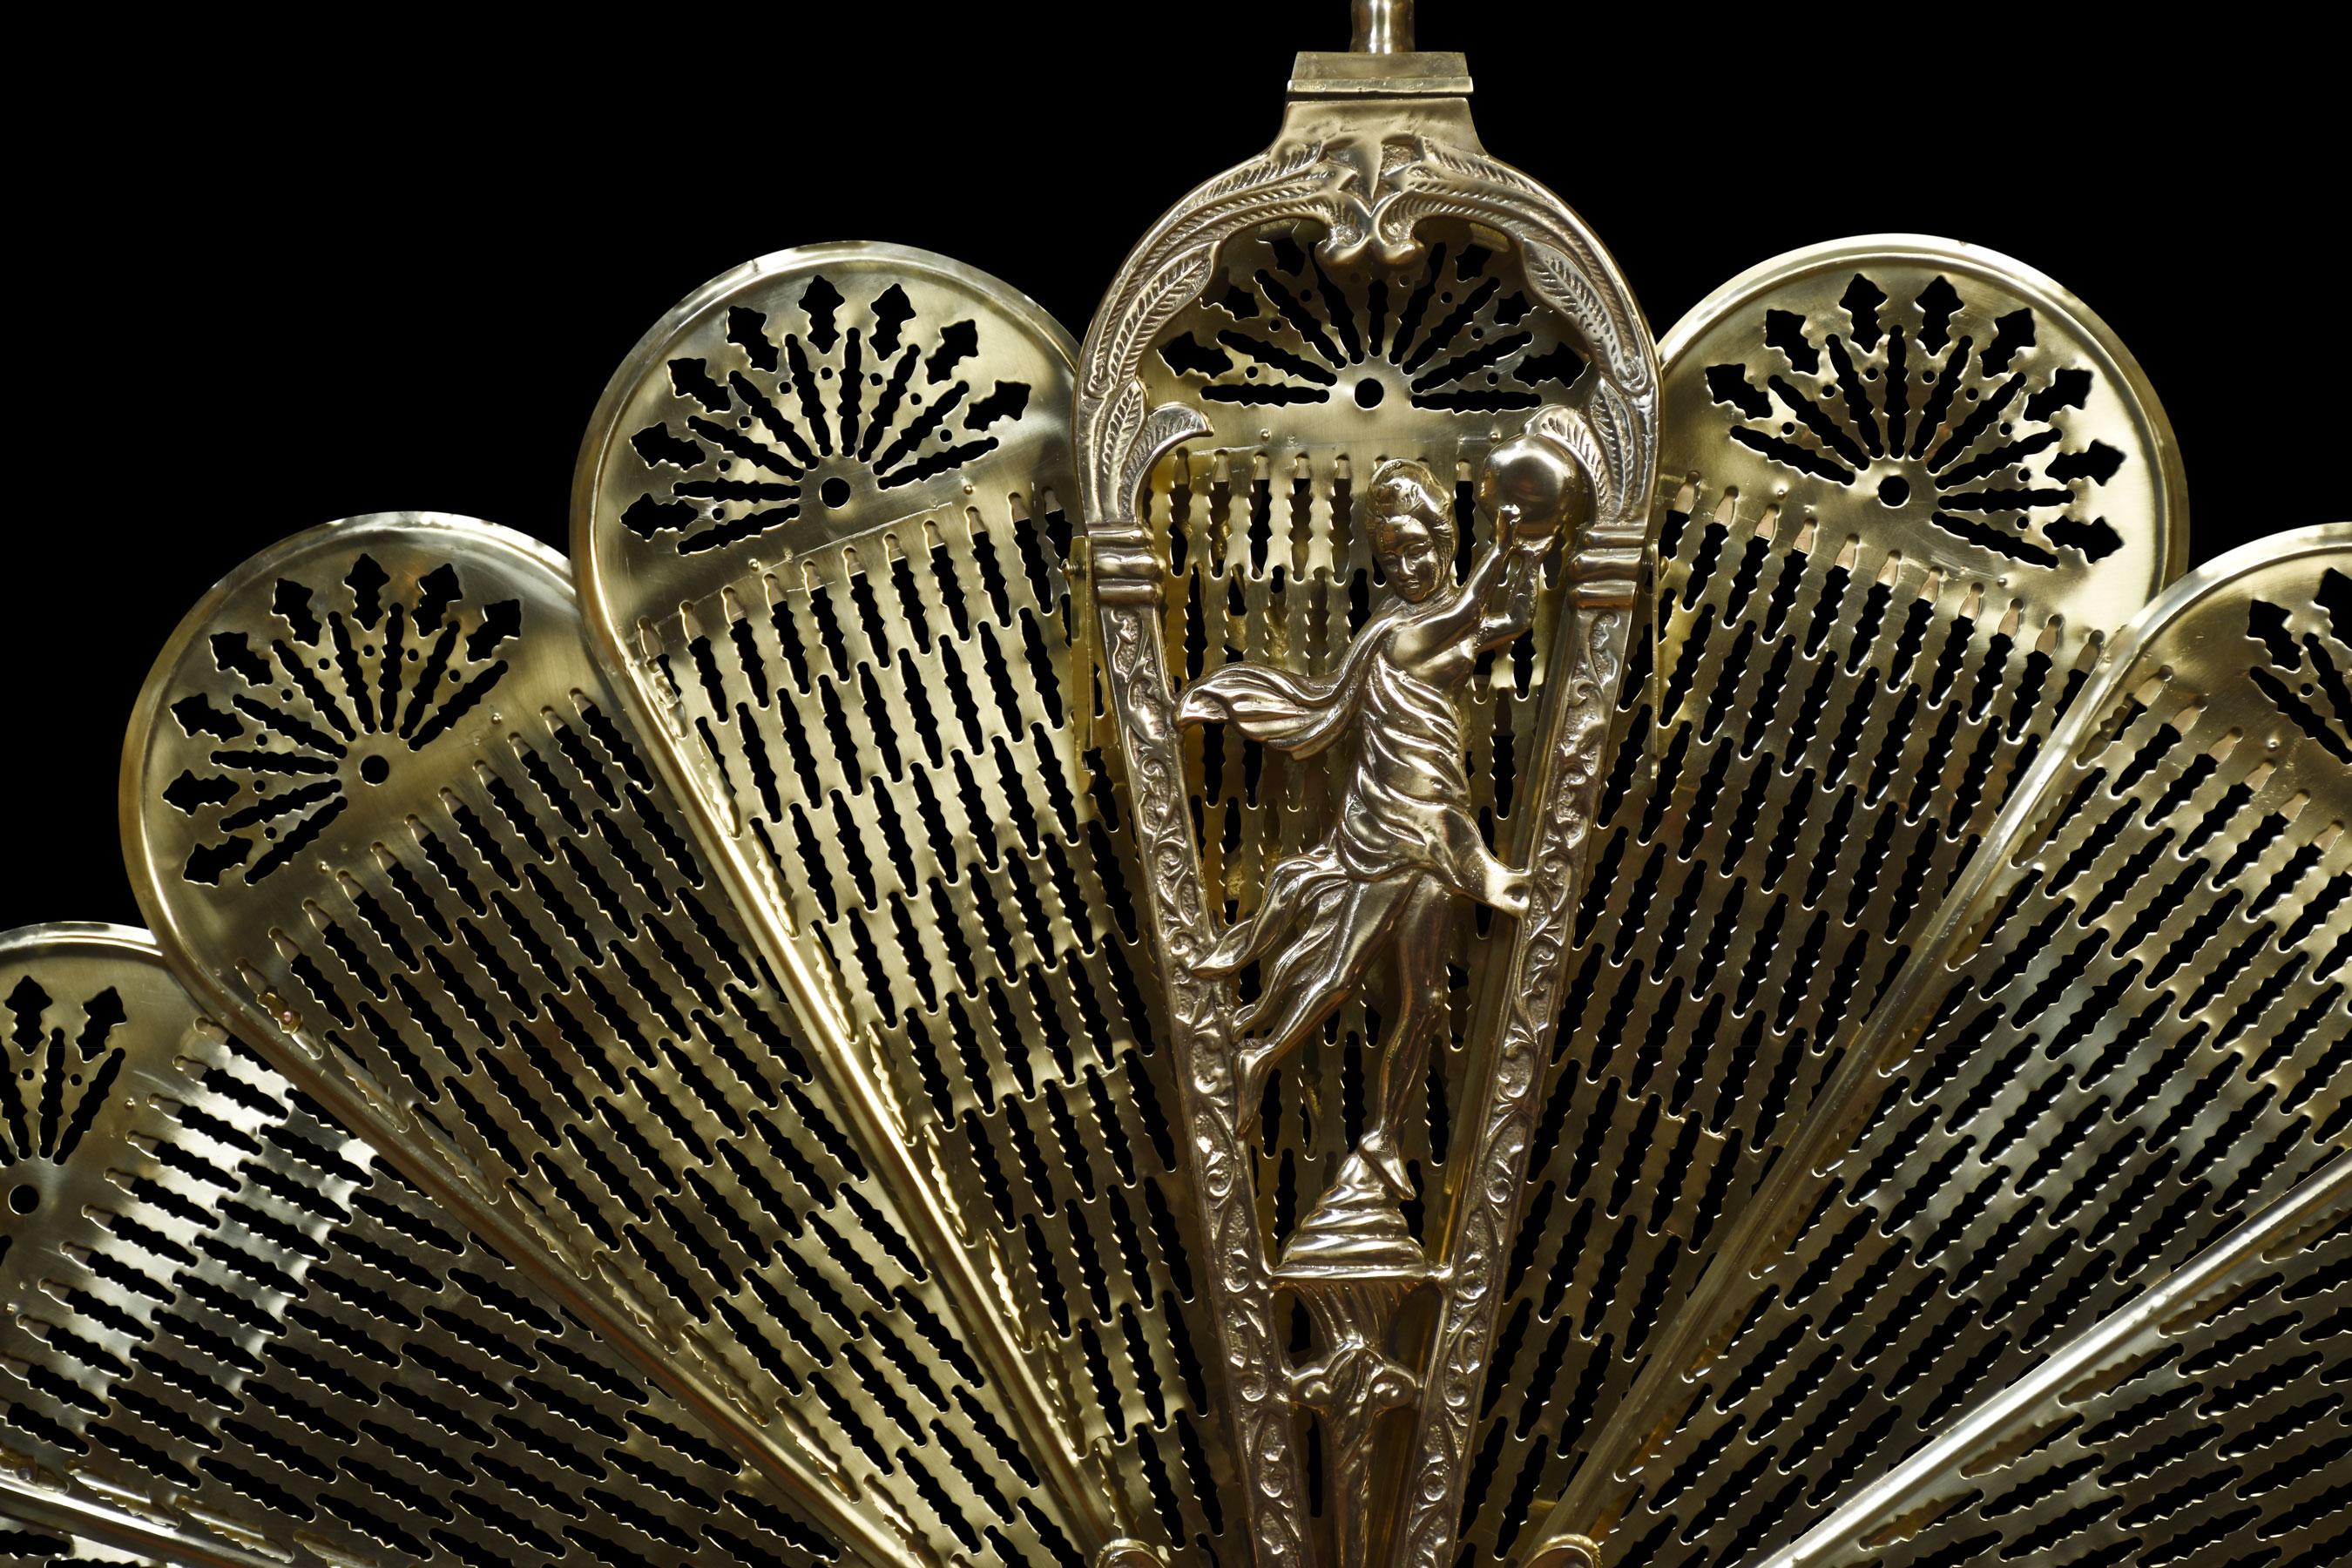 Brass peacock fire fan, of petal form frame with pierced finial holding nine conforming reticulated expanding segments, supported on scroll acanthus base.
Dimensions
Height 35 Inches
Width 47.5 Inches
Depth 8 Inches.